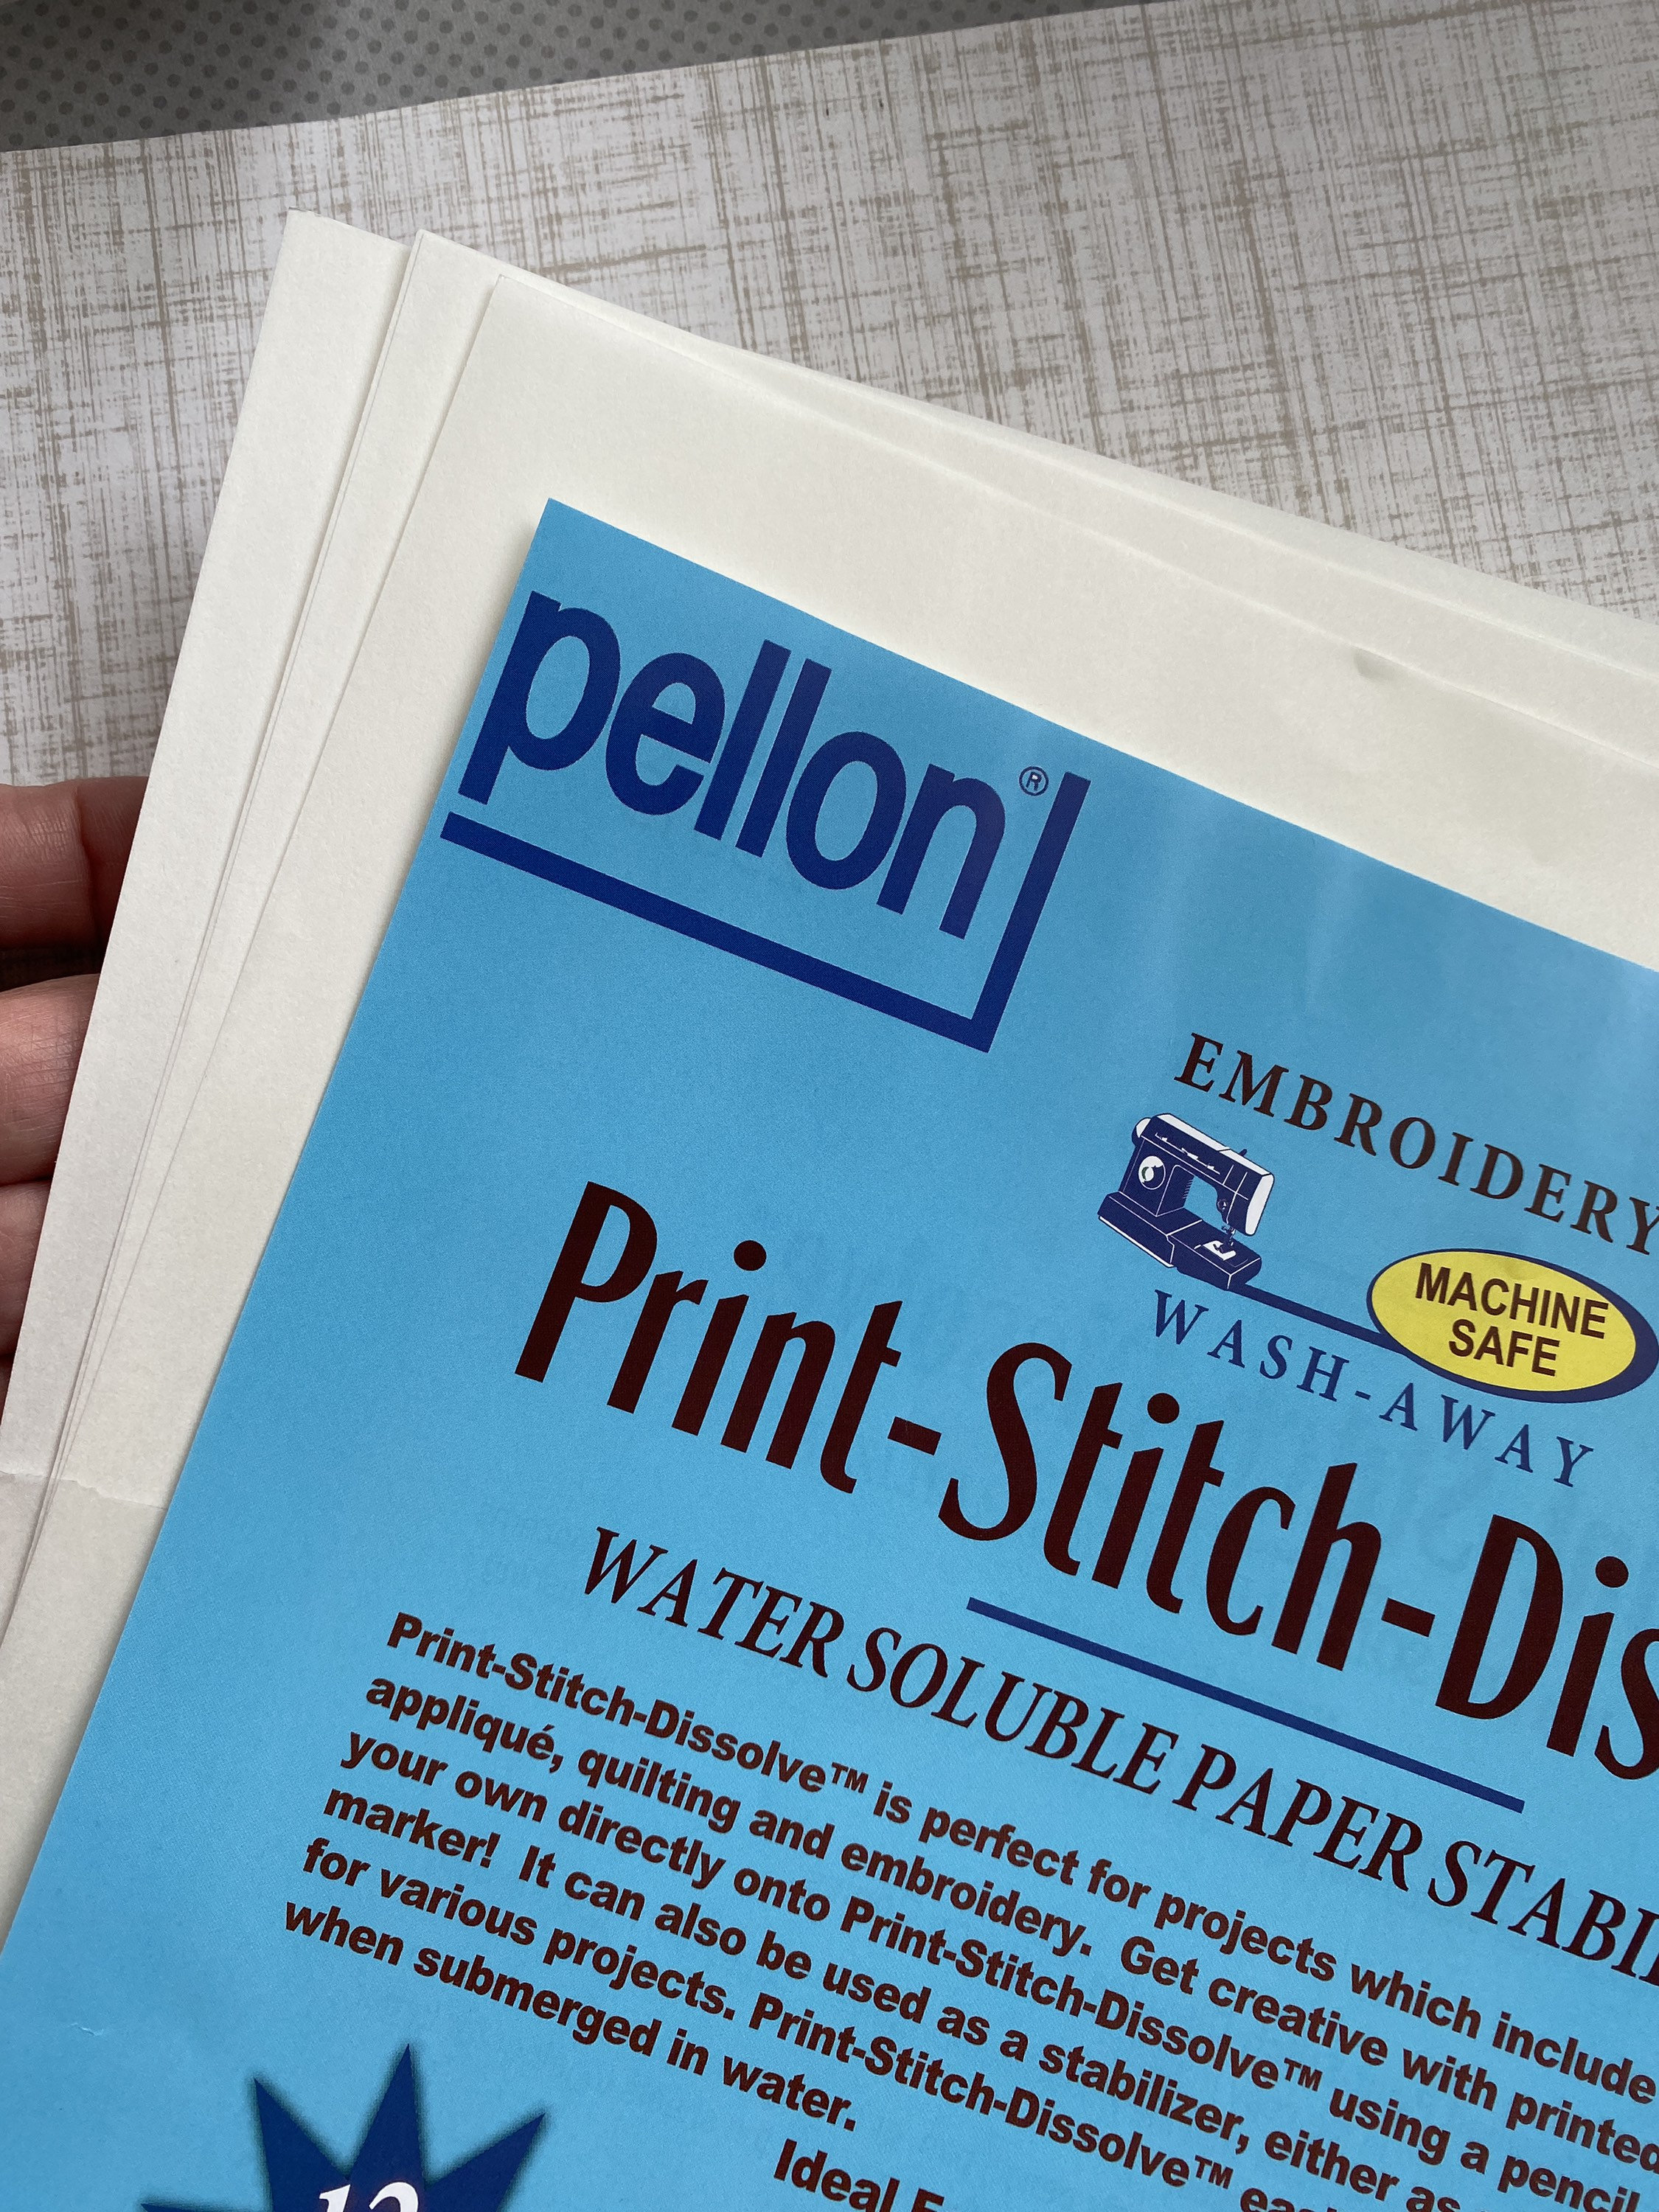 Pellon Print Stitch Dissolve, Pellon 2301S, Water Soluble Paper Stabilizer,  Embroidery, Quilt Templates, Foundation Piecing, 